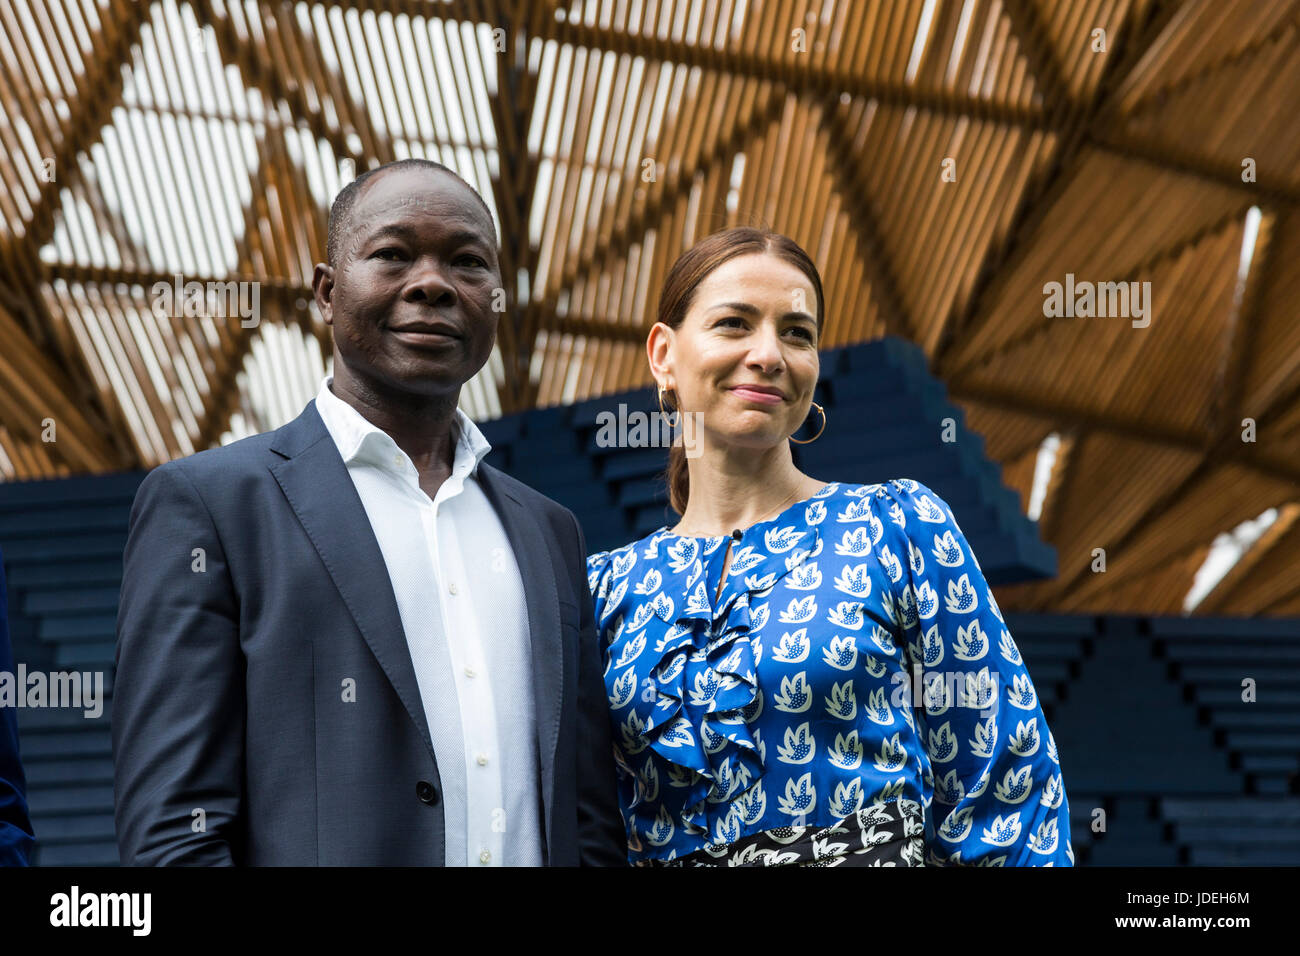 London, UK. 20 June 2017. L-R: Francis Kere and Yana Peel, CEO, Serpentine Galleries. Diebedo Francis Kere, the award-winning architect from Gando, Burkina Faso, has designed the Serpentine Pavilion 2017, next to the Serpentine Gallery in Kensington Gardens. Kere leads the Berlin-based practice Kere Architecture. He is the 17th architect to accept the Serpentine Gallery's invitation to design a temporary Pavilion in its grounds. The Pavilion is open to the public from 23 June to 8 October 2017. Stock Photo